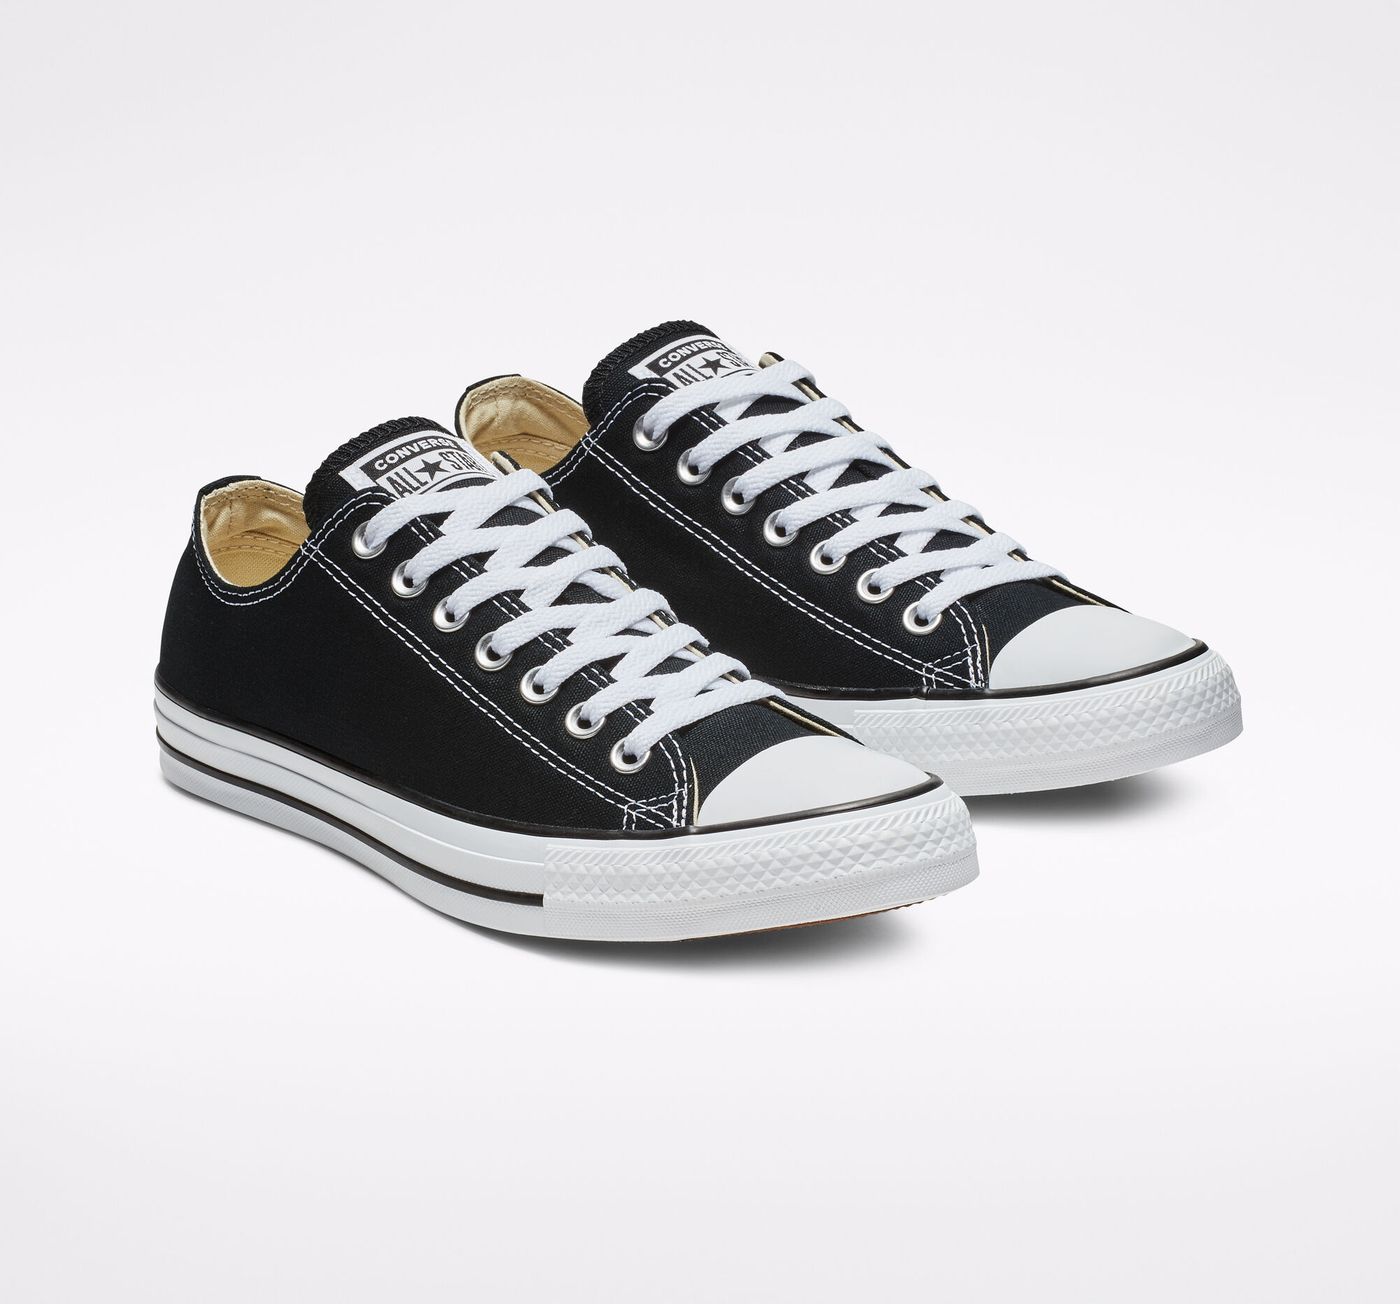 SNEAKERS CHUCK TAYLOR ALL STAR OX CONVERSE UNISEX